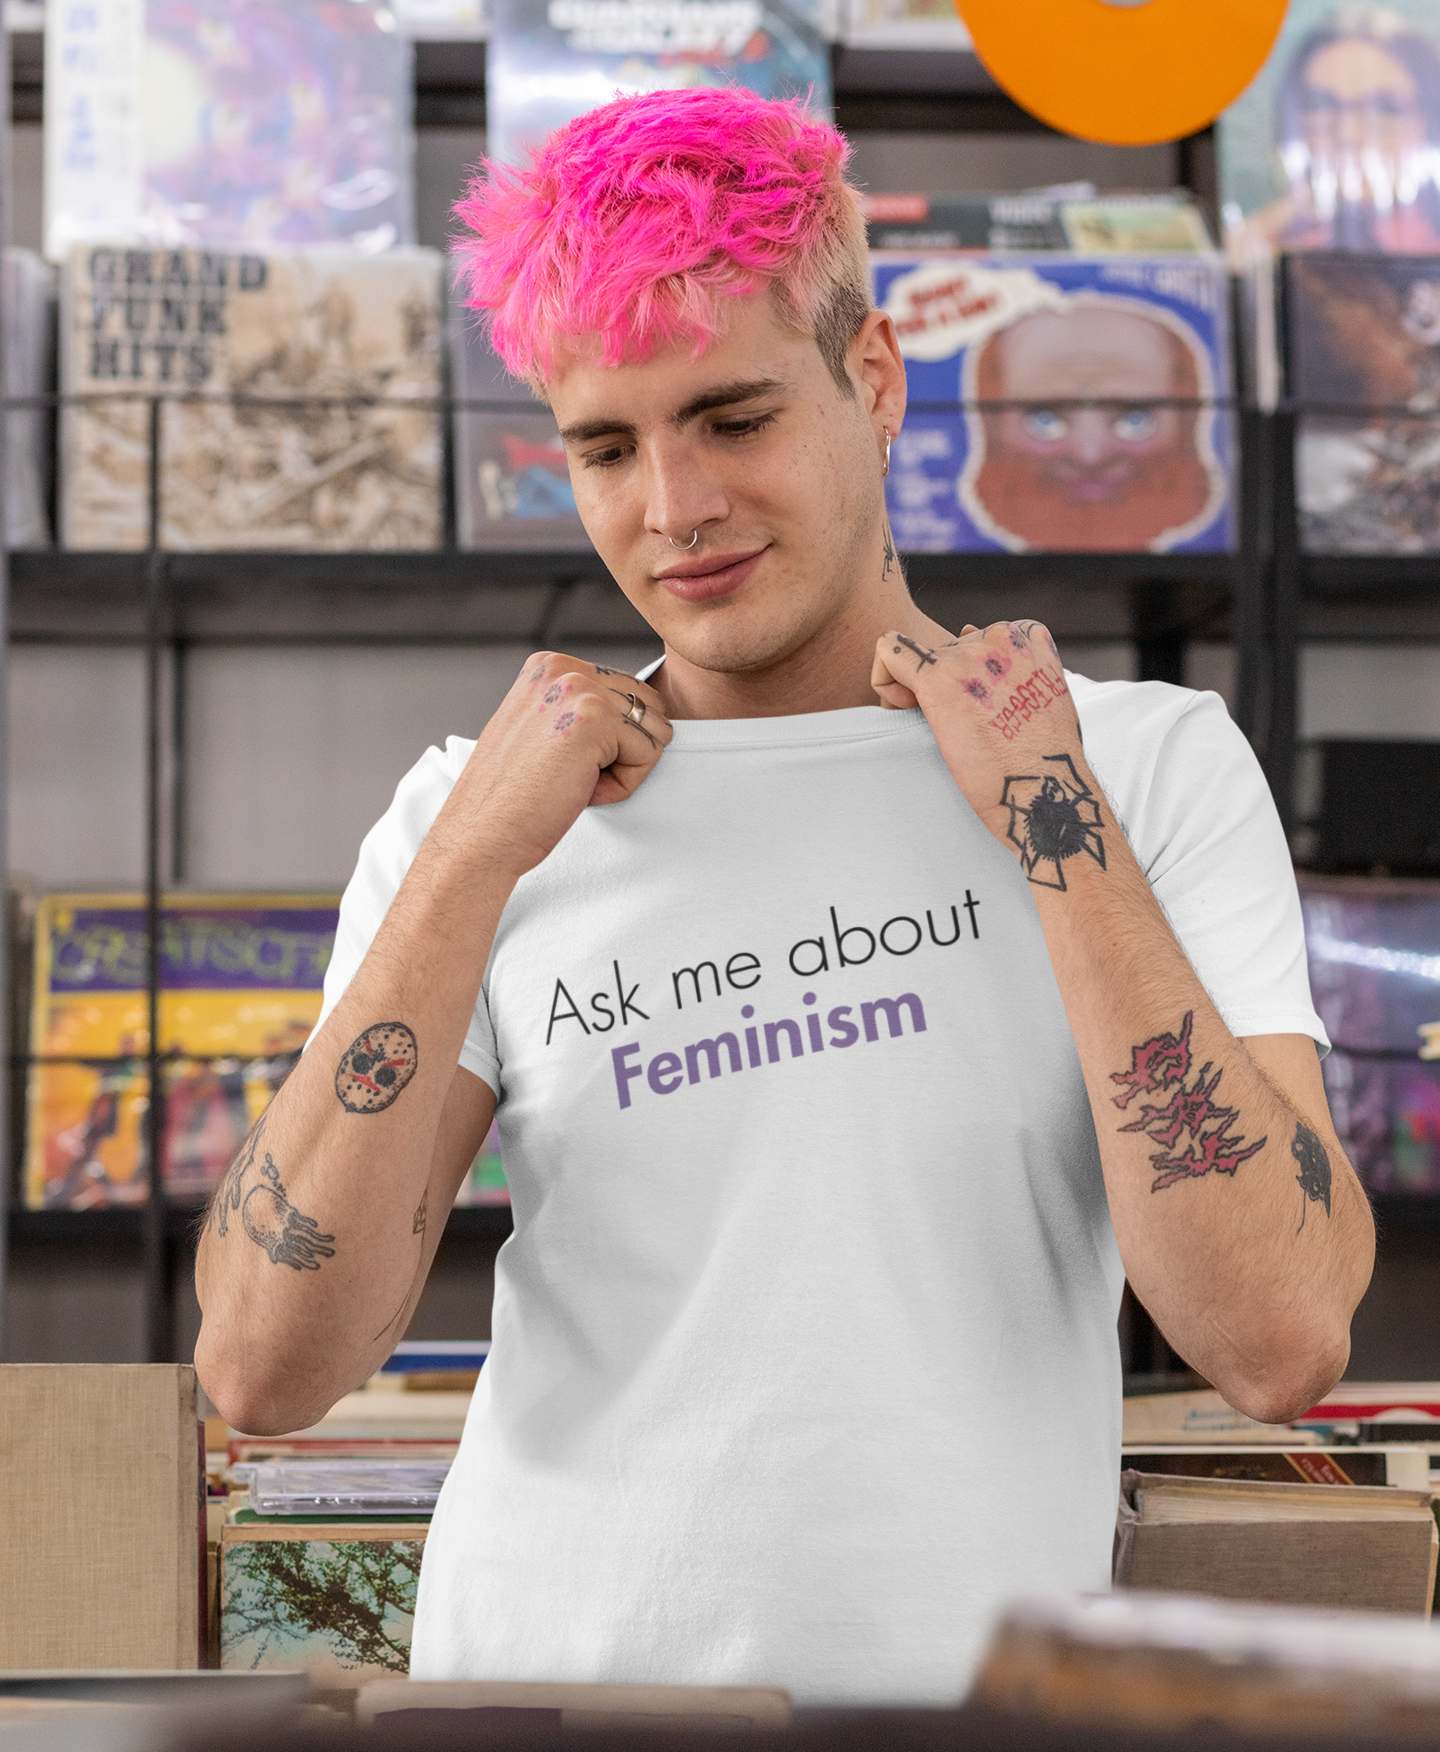 t-shirt-mockup-featuring-a-man-with-pink-hair-at-a-music-store-33311_1600x.jpg